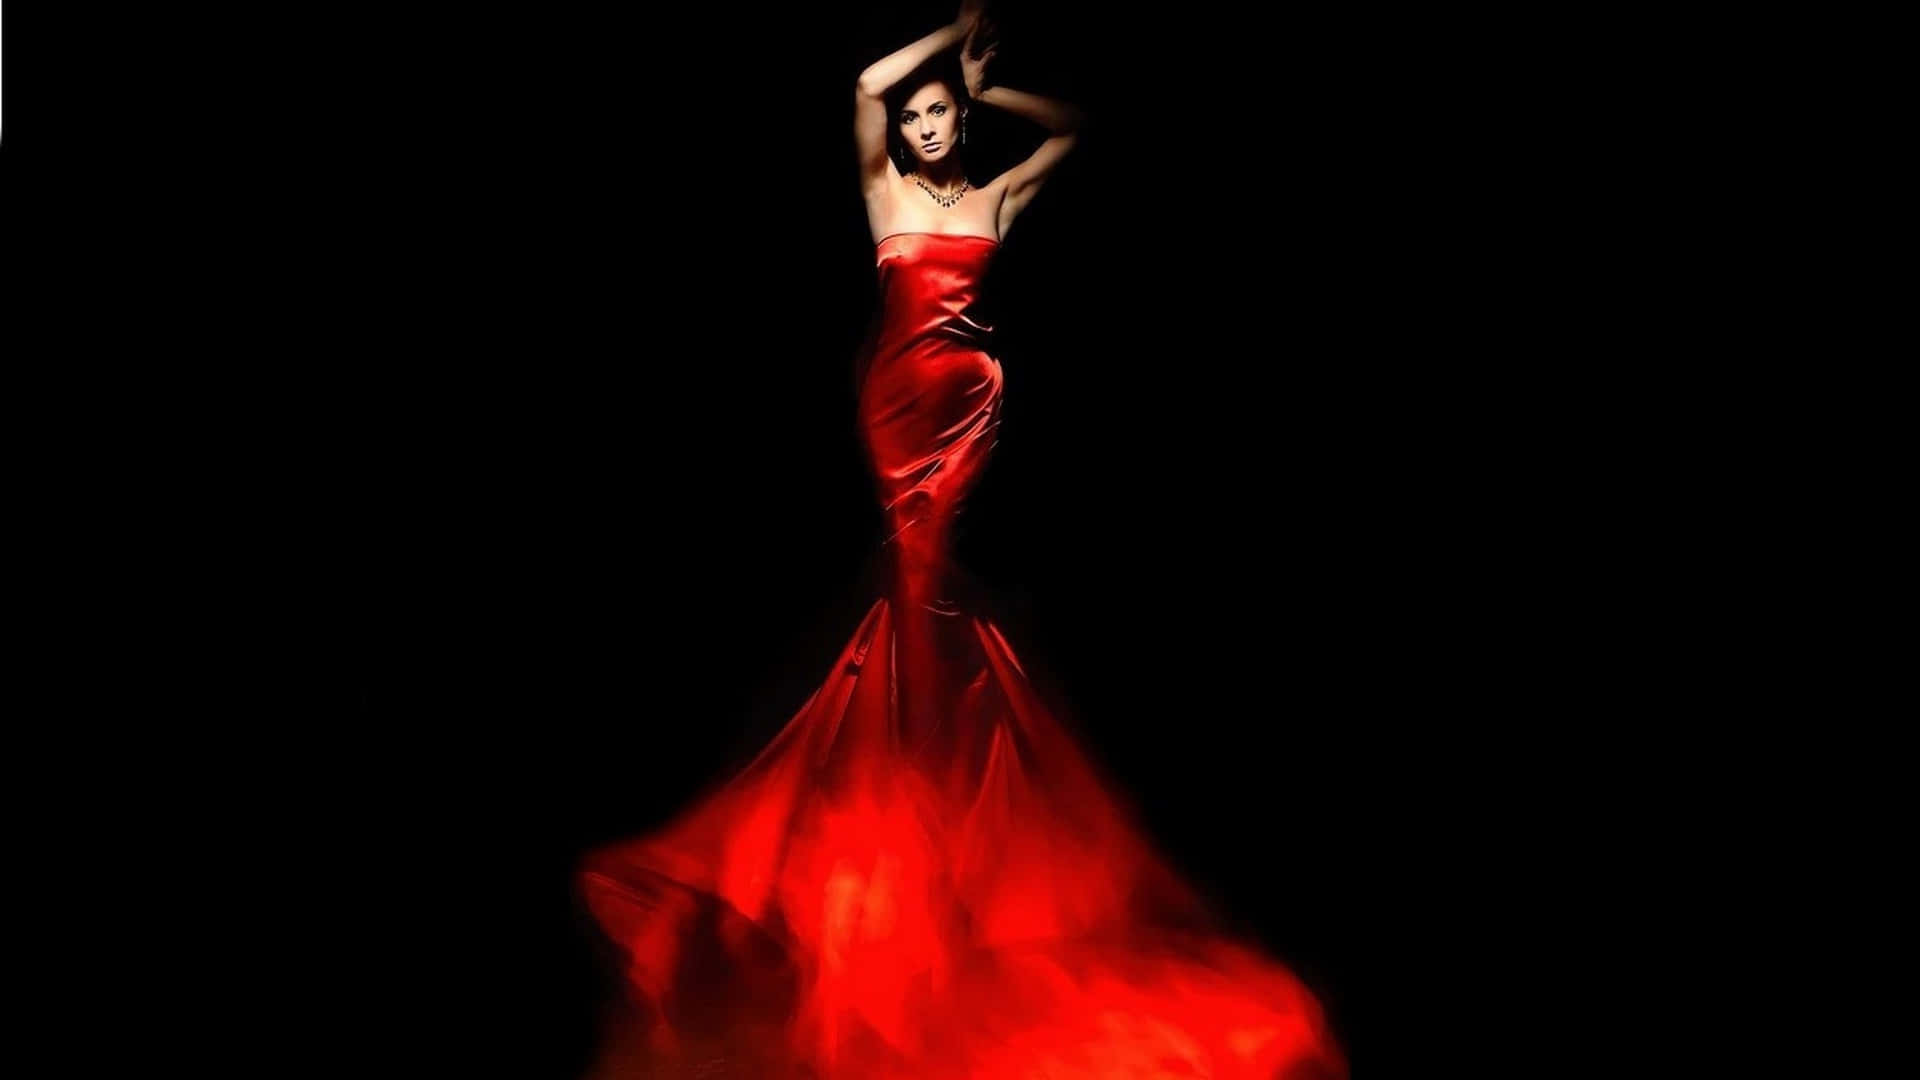 A Woman In A Red Dress Is Posing In The Dark